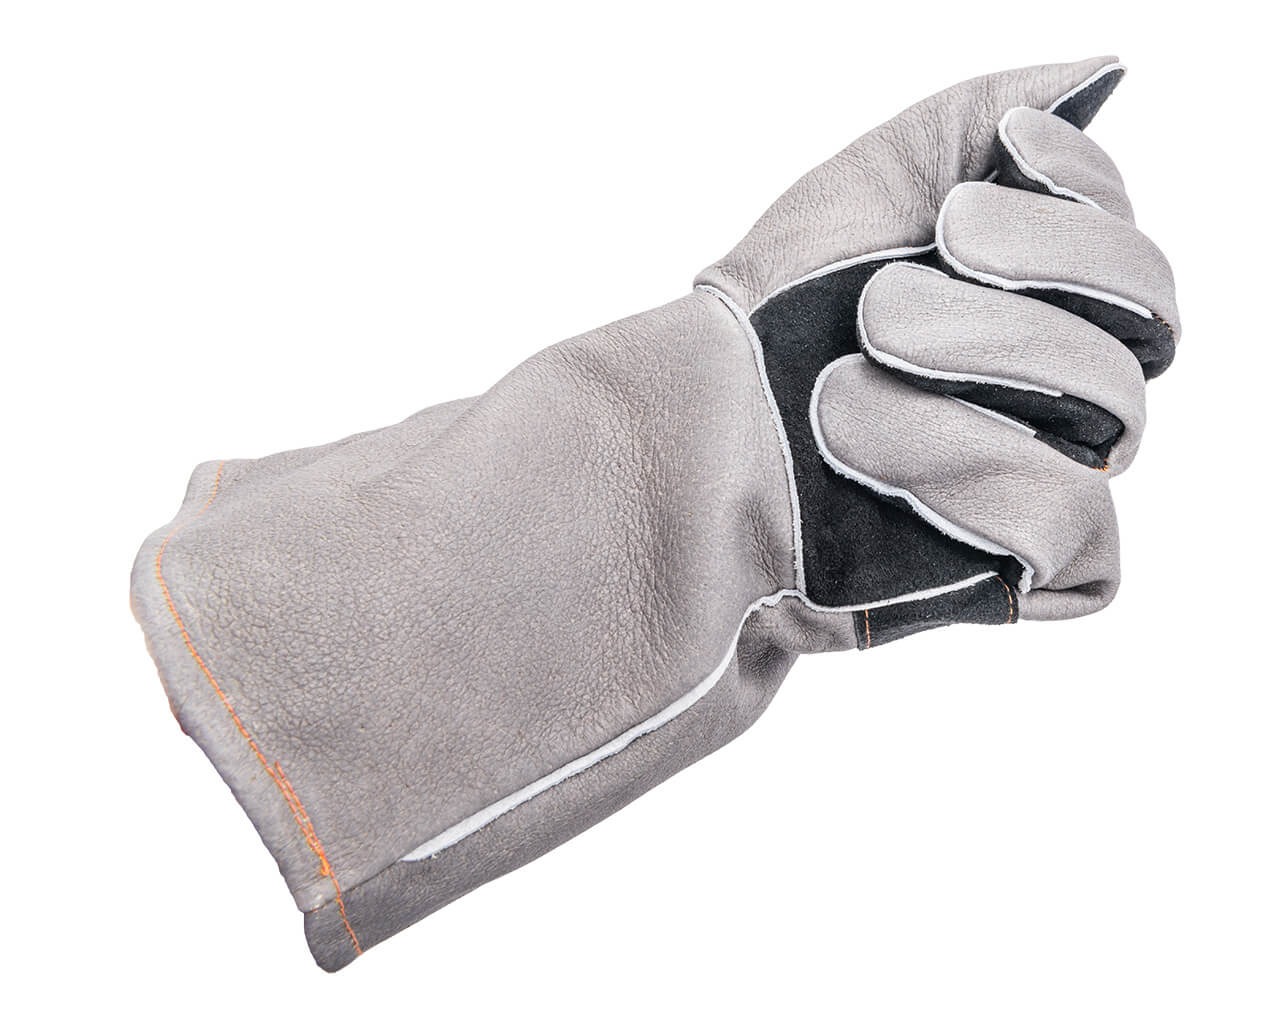 Oklahoma Joe’s Leather Smoking Gloves Pair - One Size Fits Most, , hi-res image number null